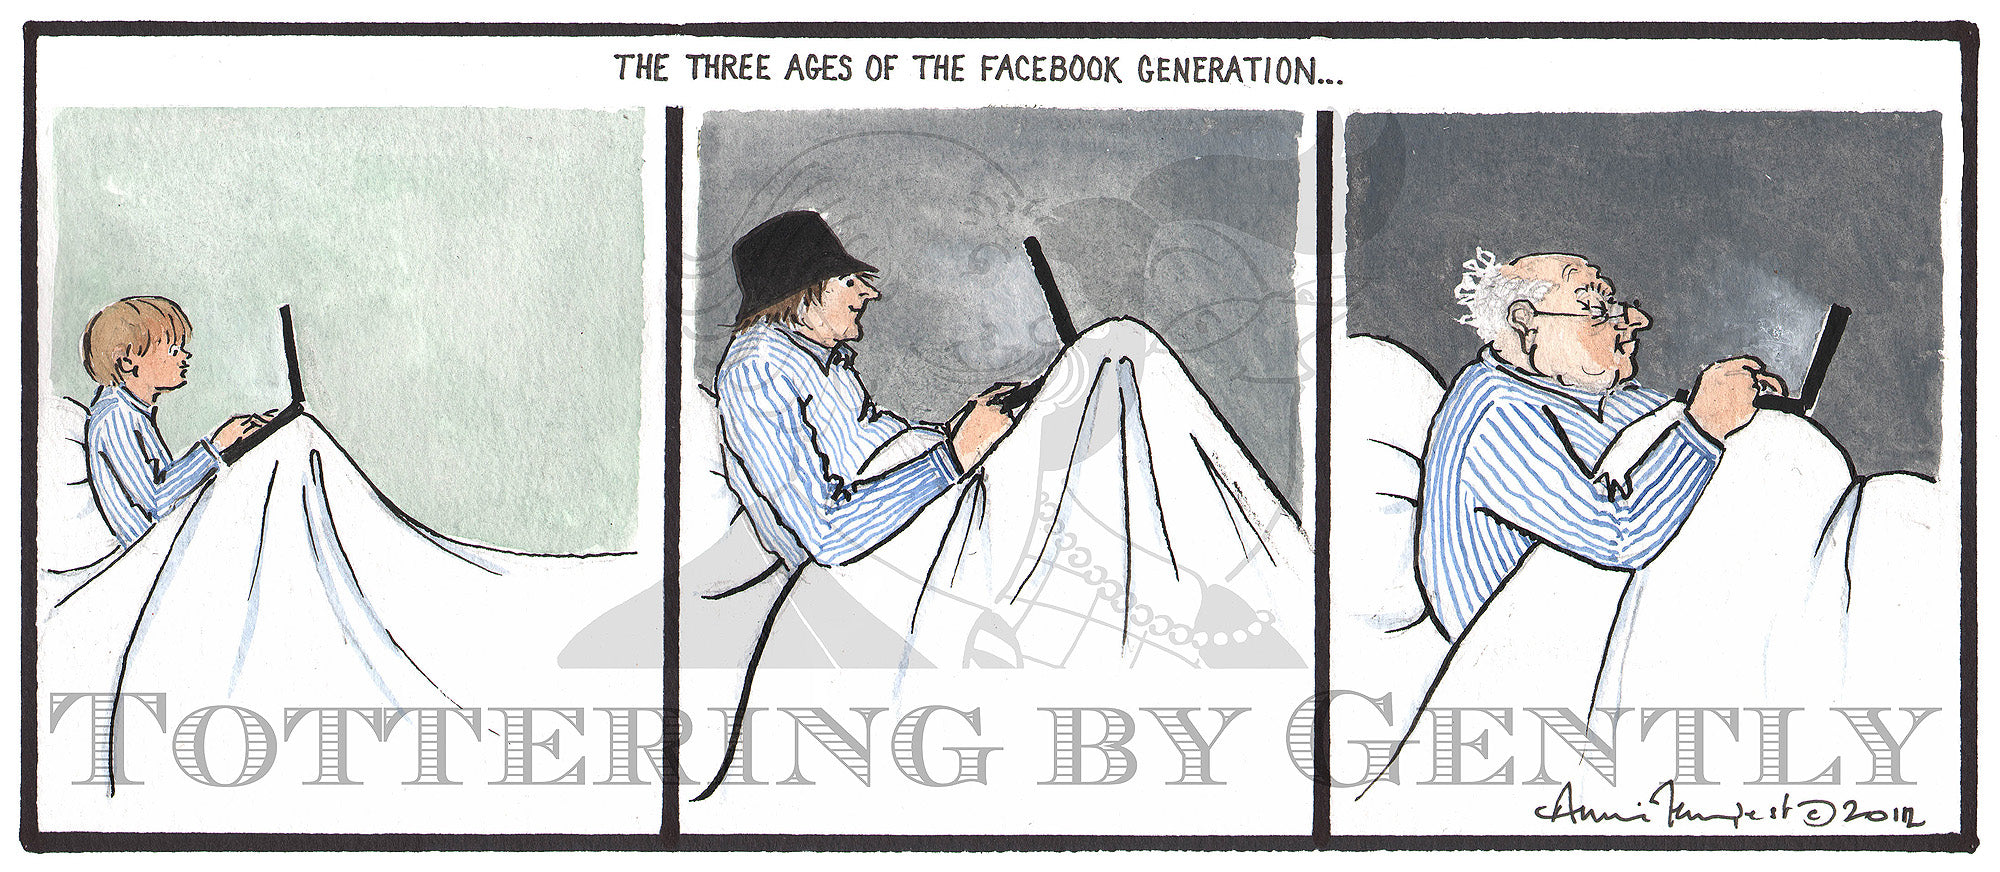 The three ages of the Facebook generation... (CL931)